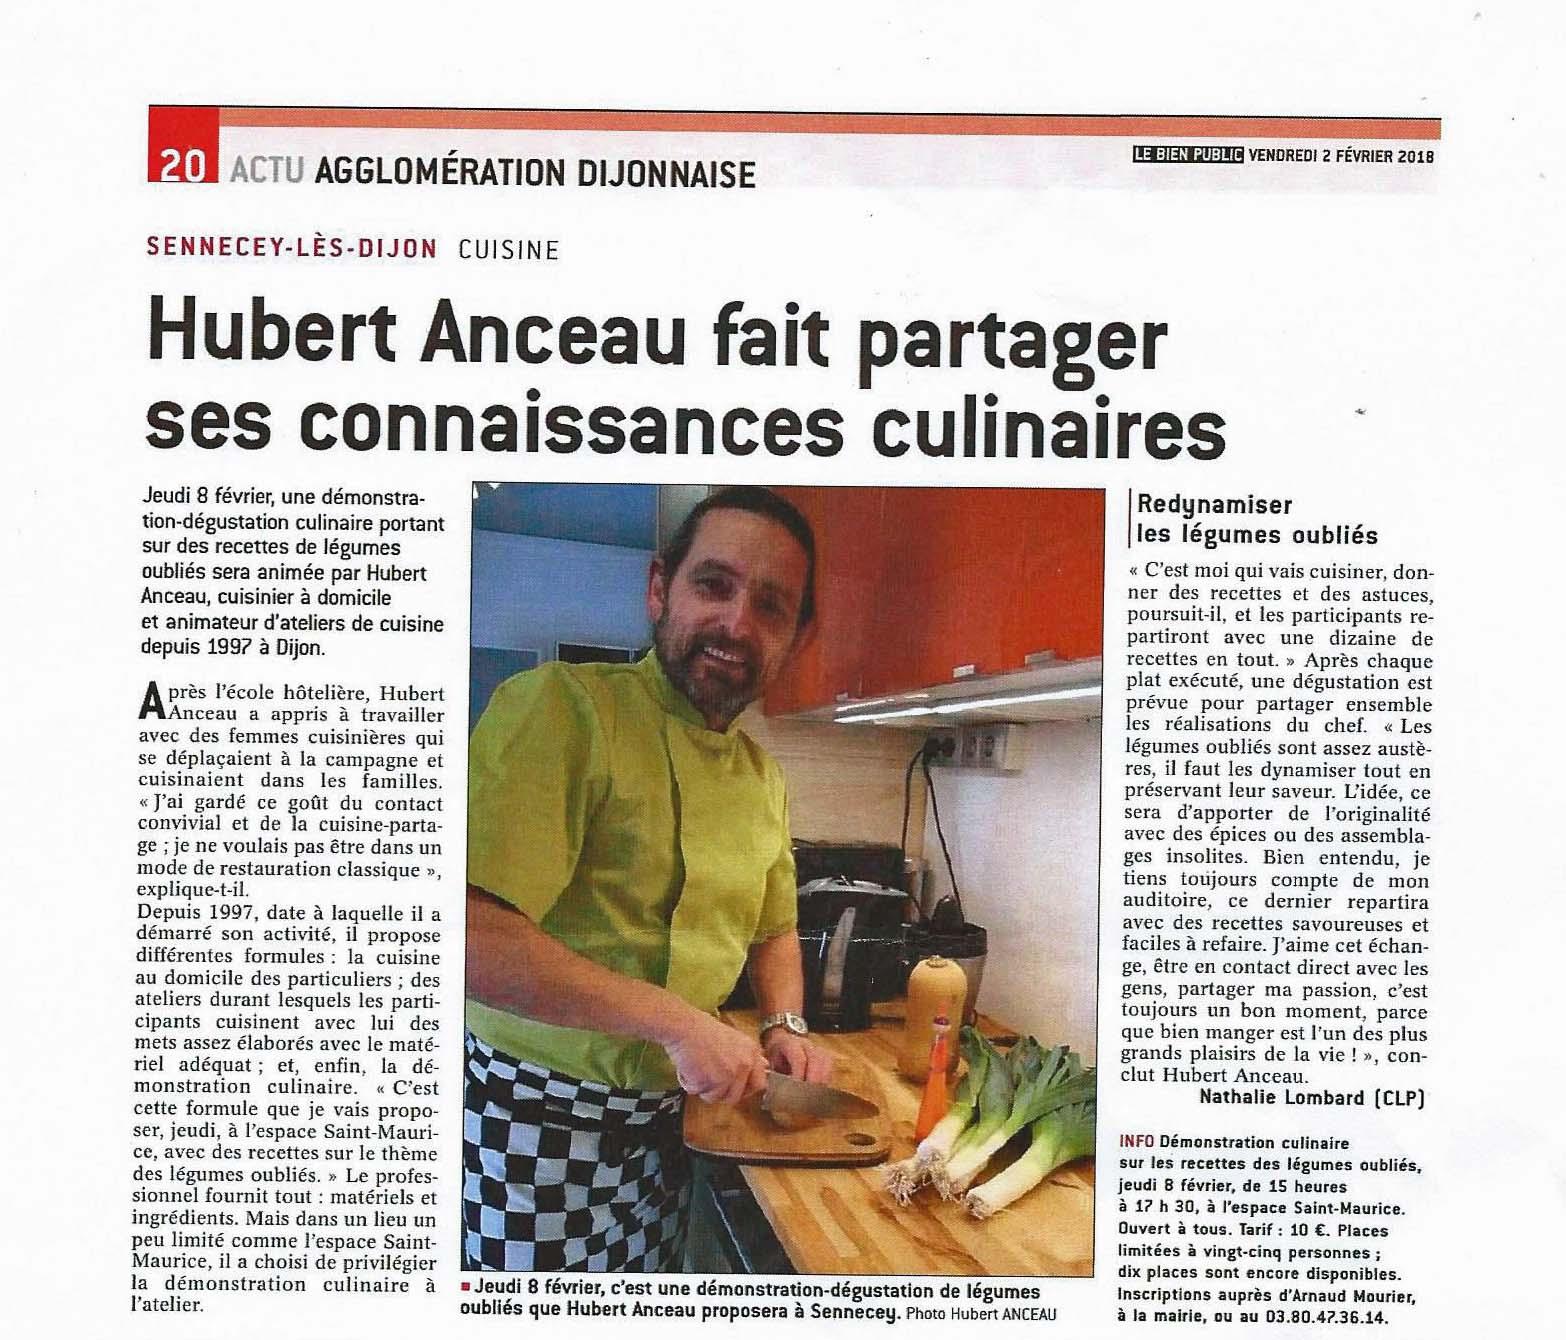 Demonstration culinaire